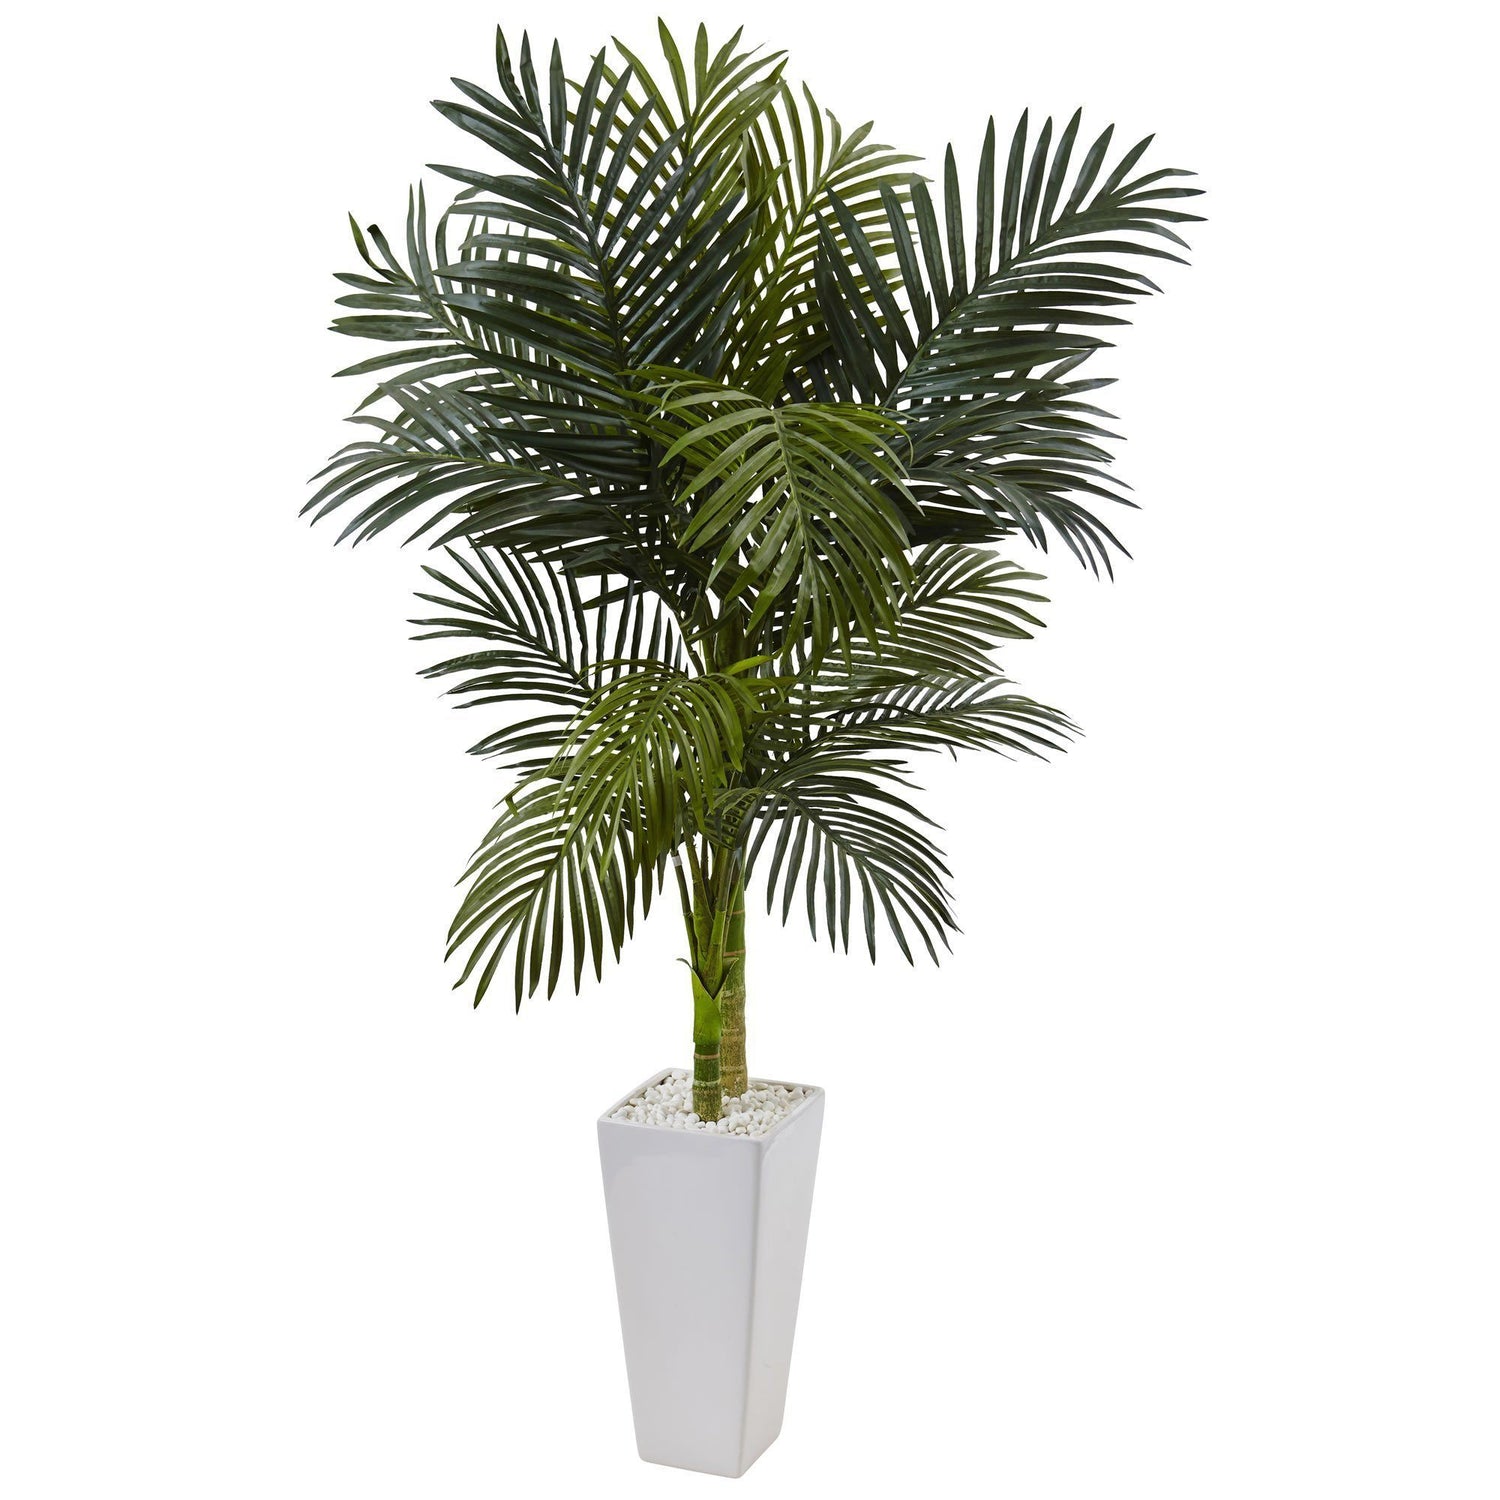 5’ Golden Cane Palm Tree in White Tower Planter